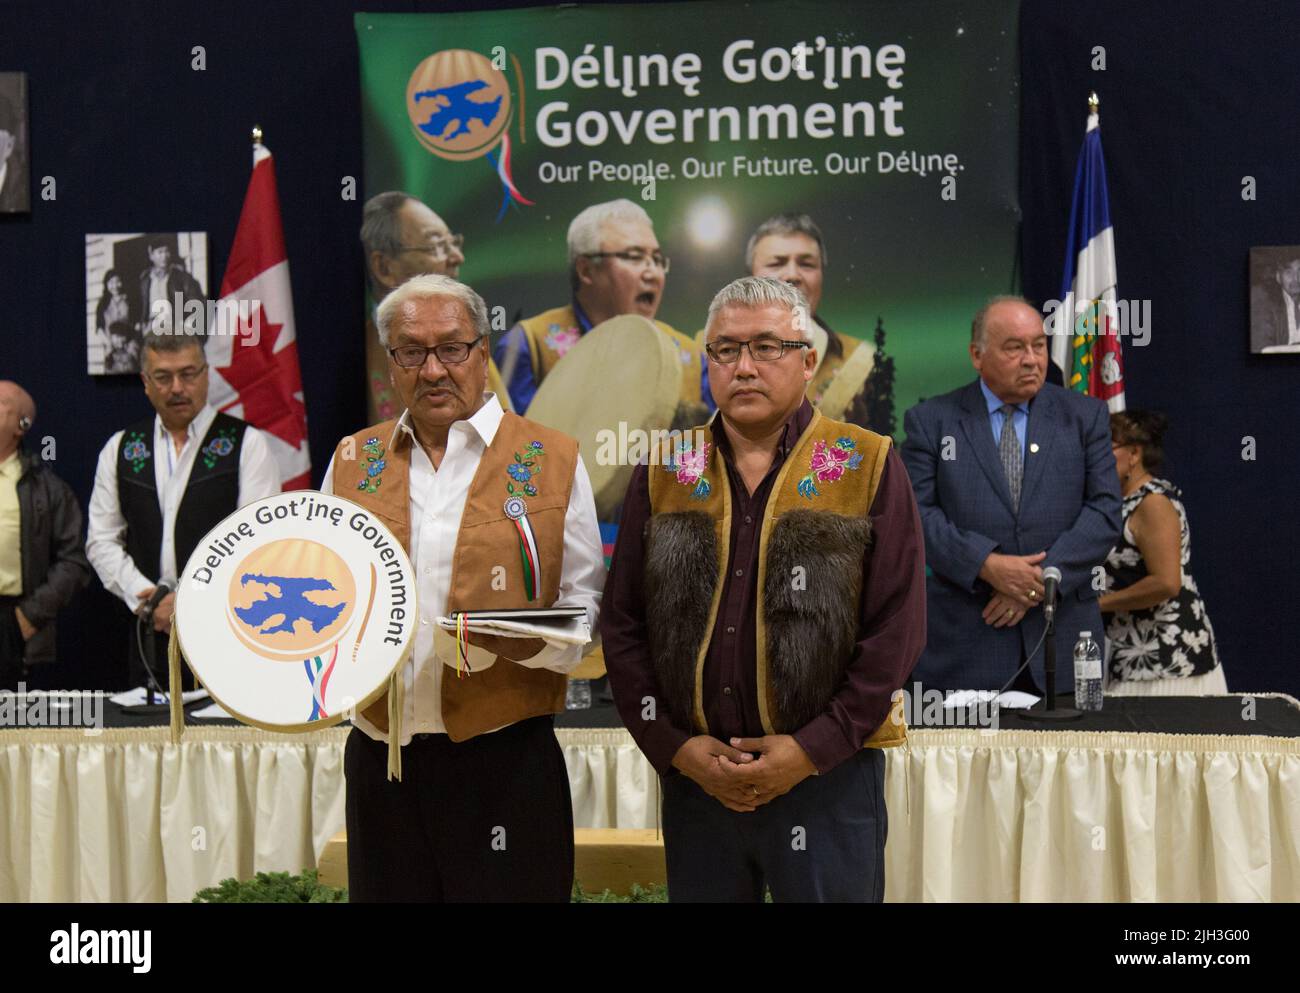 Dene government leaders at ceremony on the Effective Date of the Deline Final Self-government Agreement, in Deline, Northwest Territories, Canada. Stock Photo